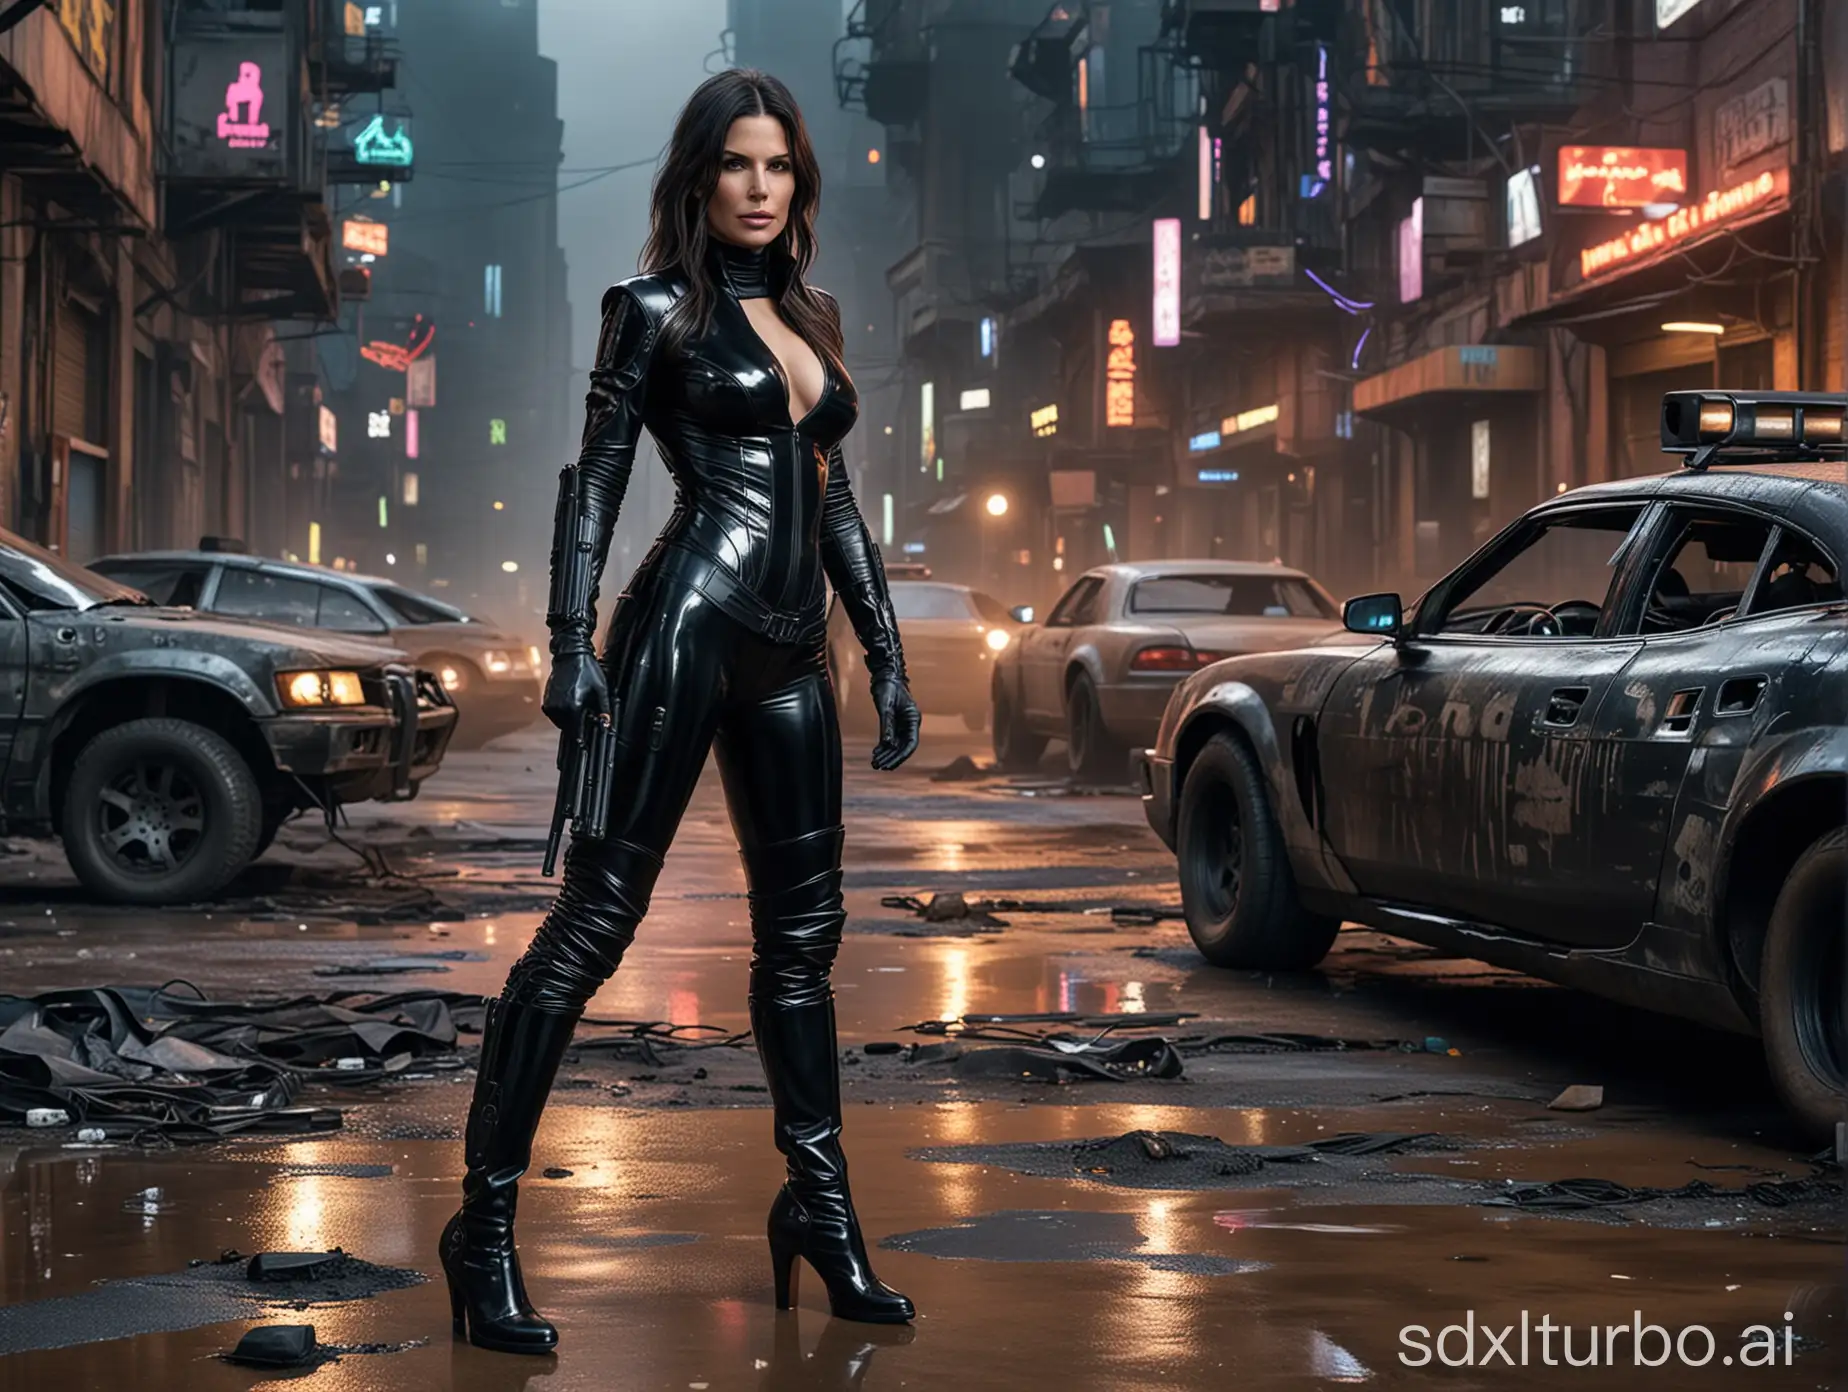 realistic hd photo , cyberpunk police Sandra Bullock standing , wearing black low-cut shinny pvc catsuit , wearing long shiny pvc gloves , wearing shinny pvc thigh high boots , in destroyed cyberpunk city with mad max car , inlighted by neons